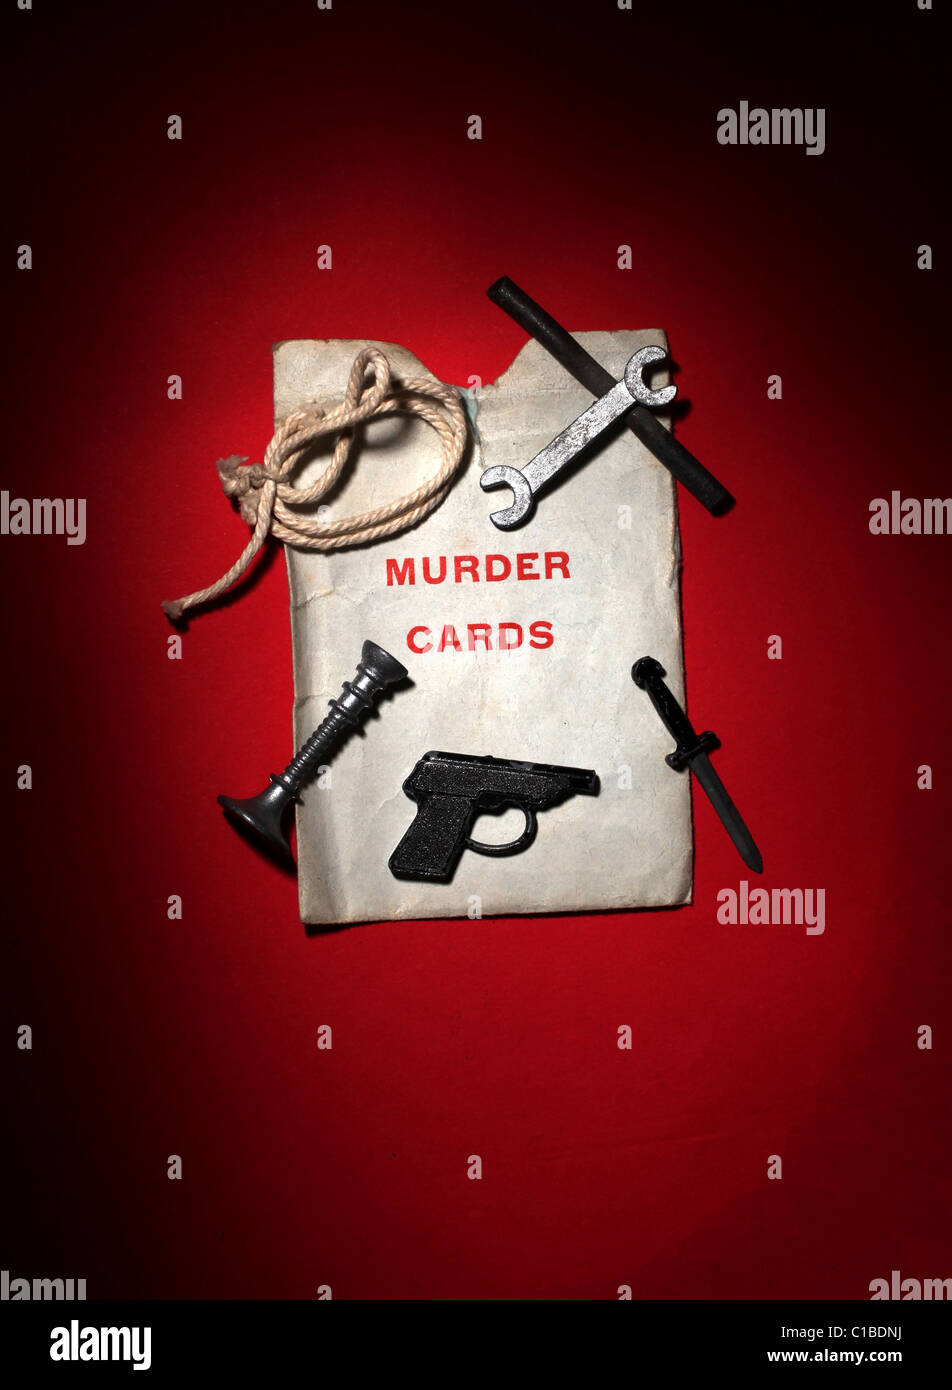 Details from the game Cluedo. The gun, lead pipe, rope, wrench and dagger and murder cards. Stock Photo